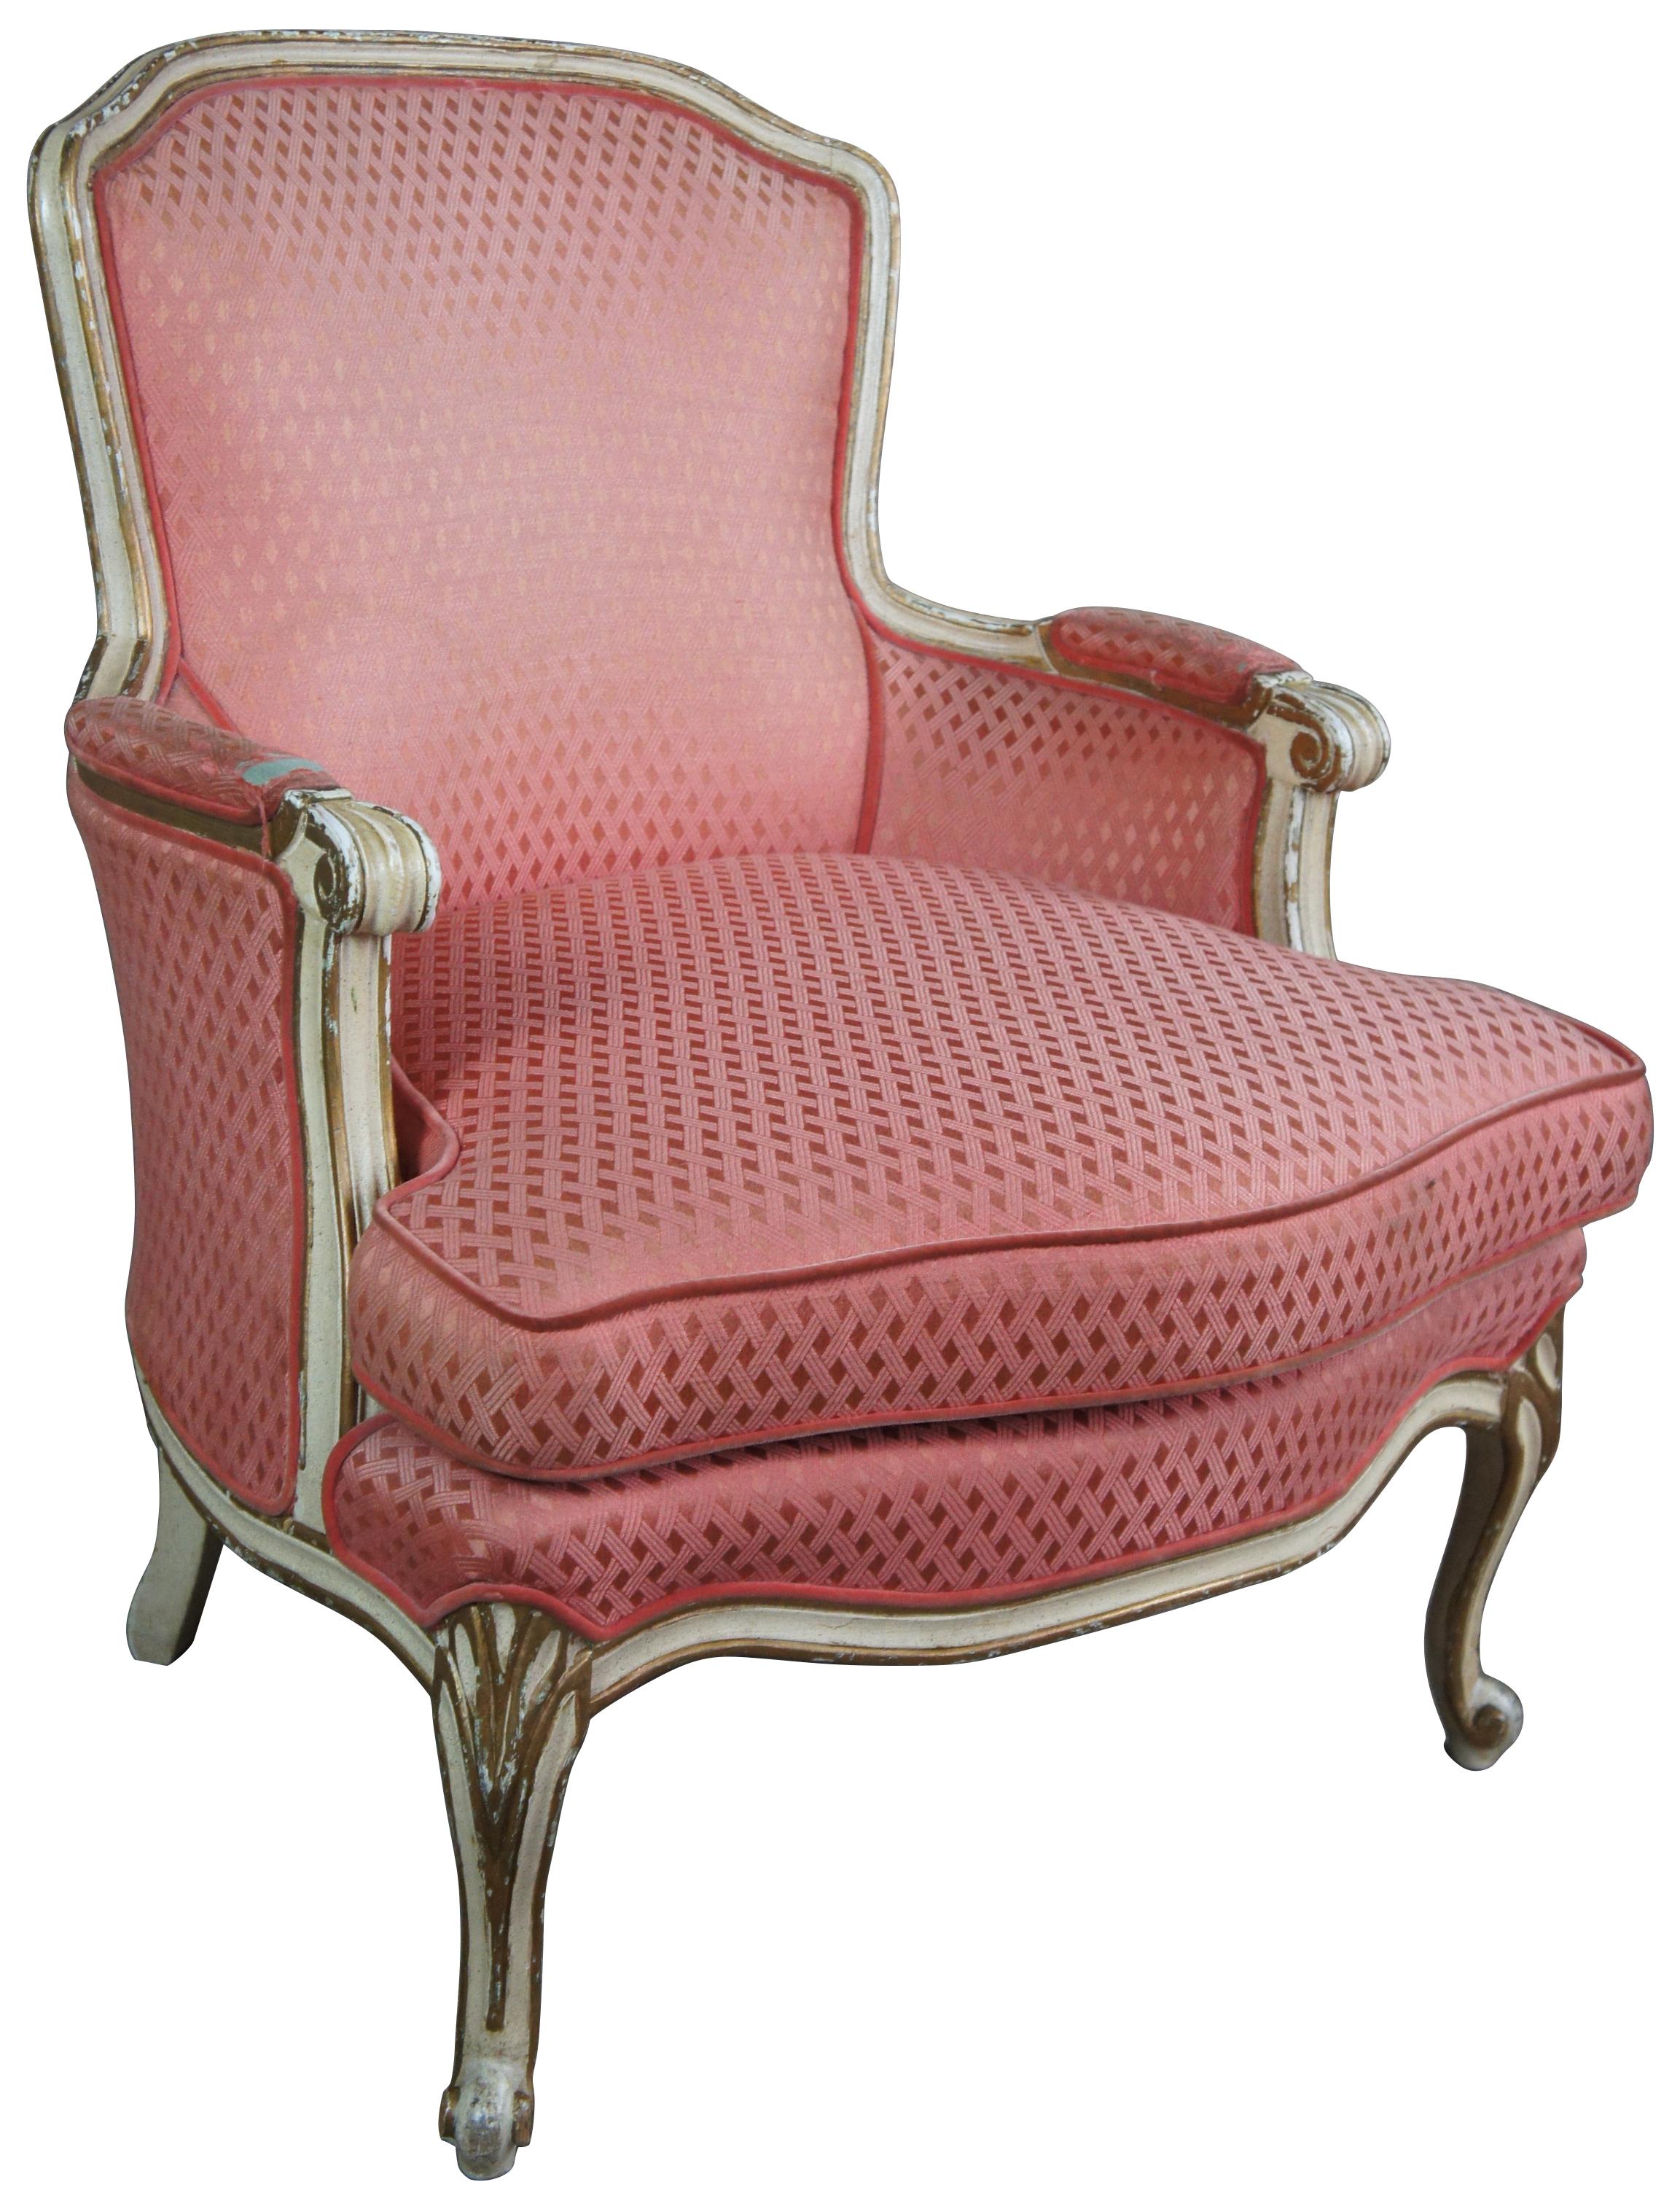 French Provincial armchair, circa 1930s. Off-white with gold trim and red/pink upholstery with interwoven design.